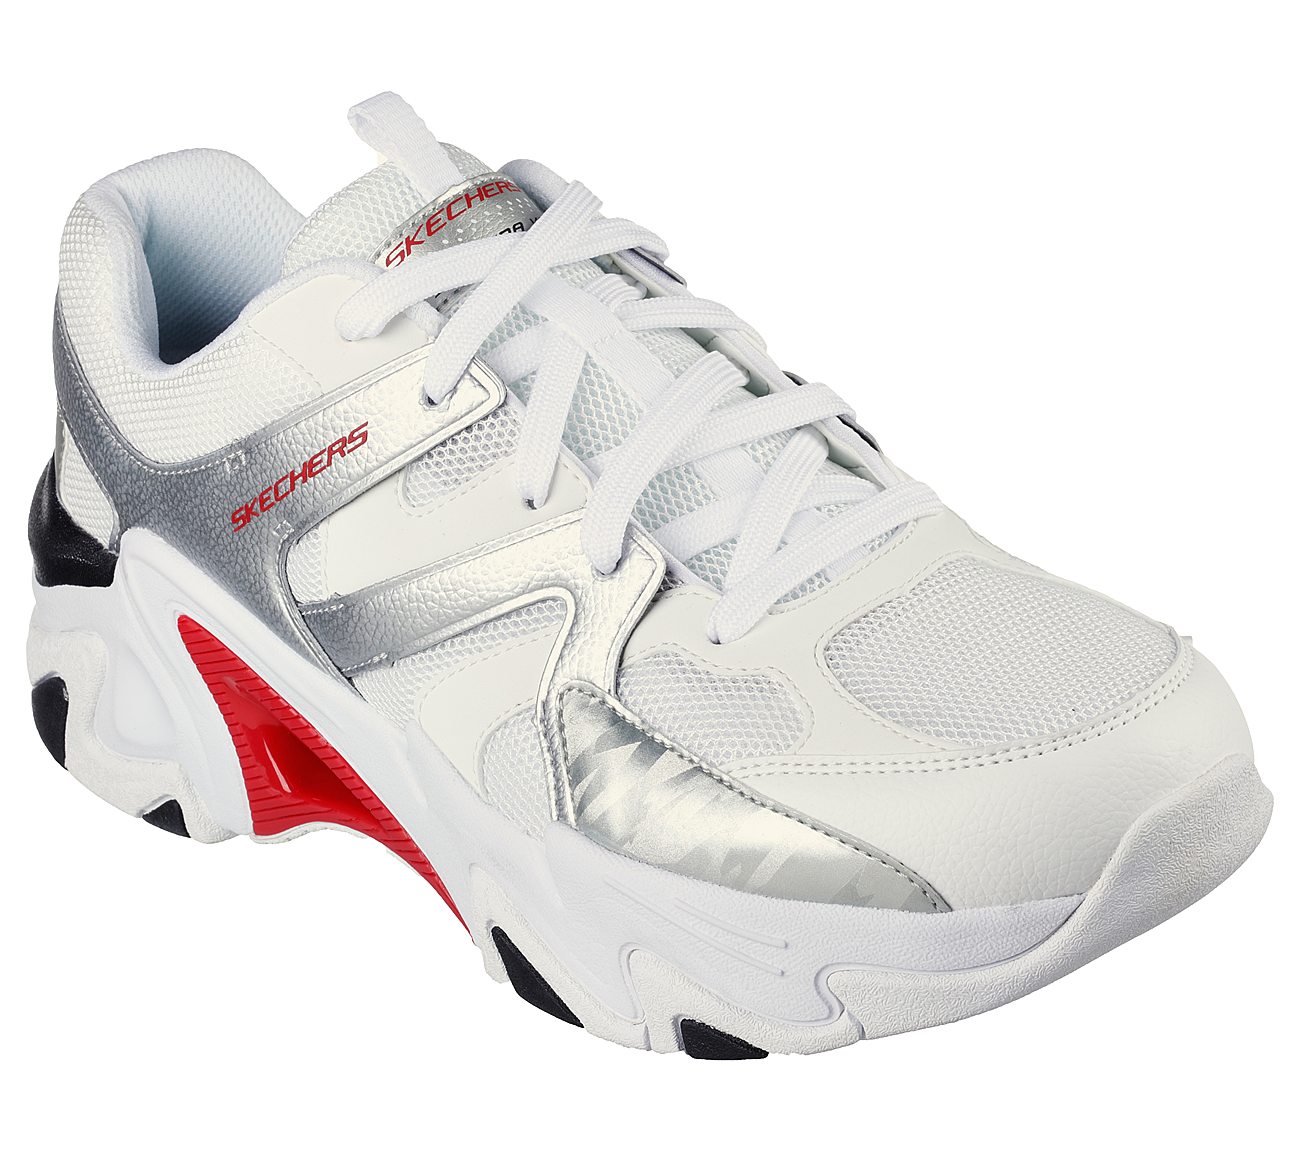 STAMINA V3, WWHITE/BLACK/RED Footwear Right View